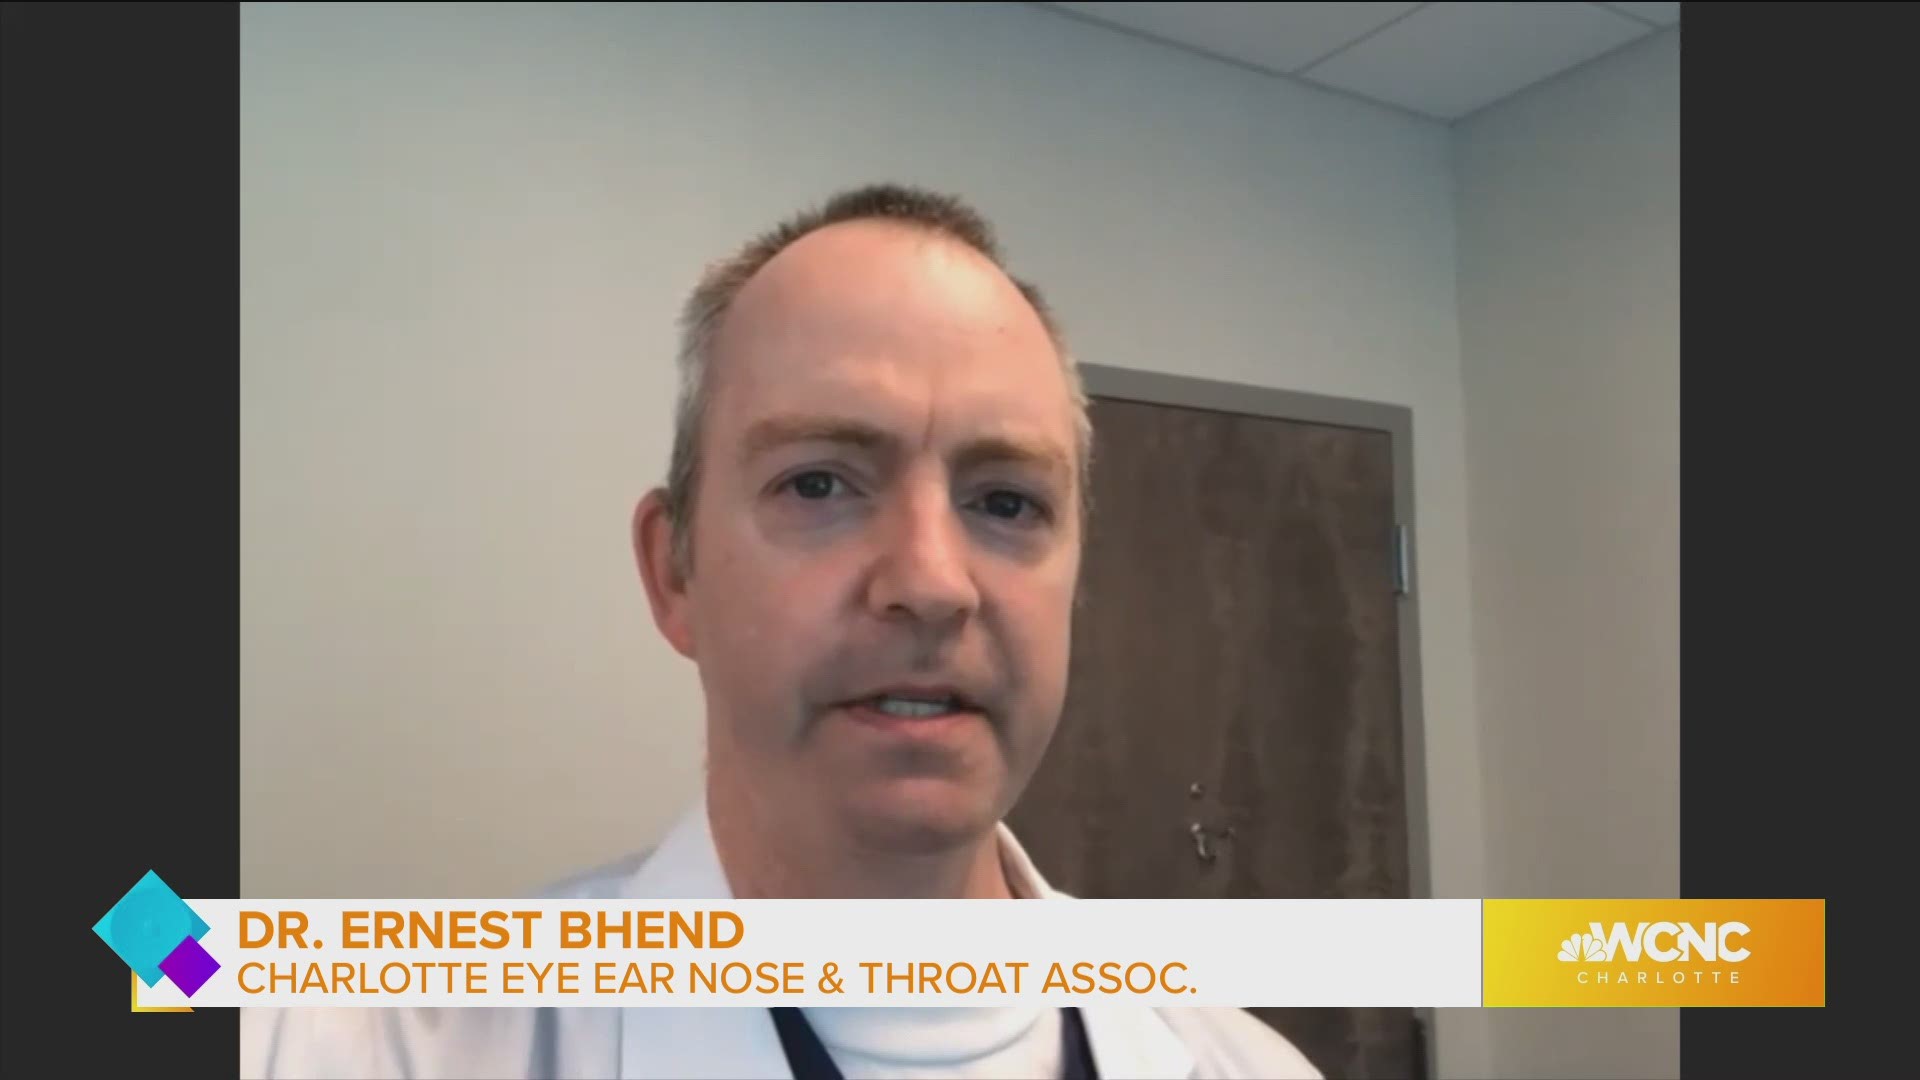 Dr. Ernest Bhend explains what a cataract is and what treatments are available to help.